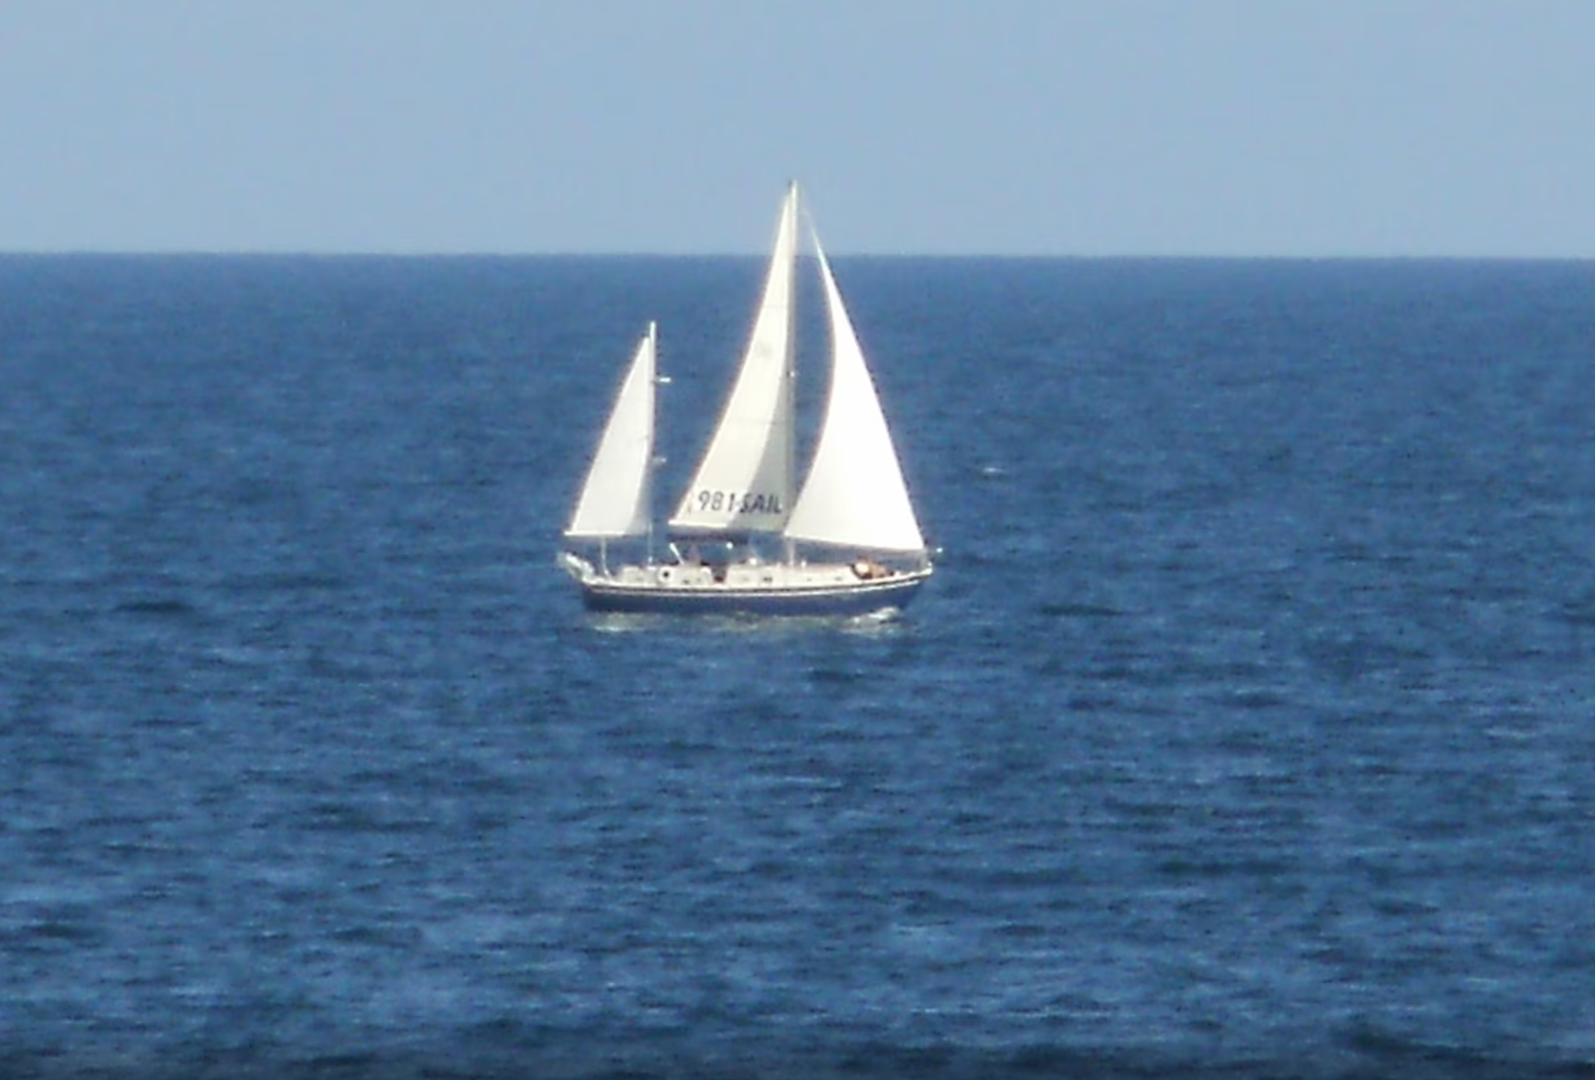 Sail Boat on the Gulf of Mexico